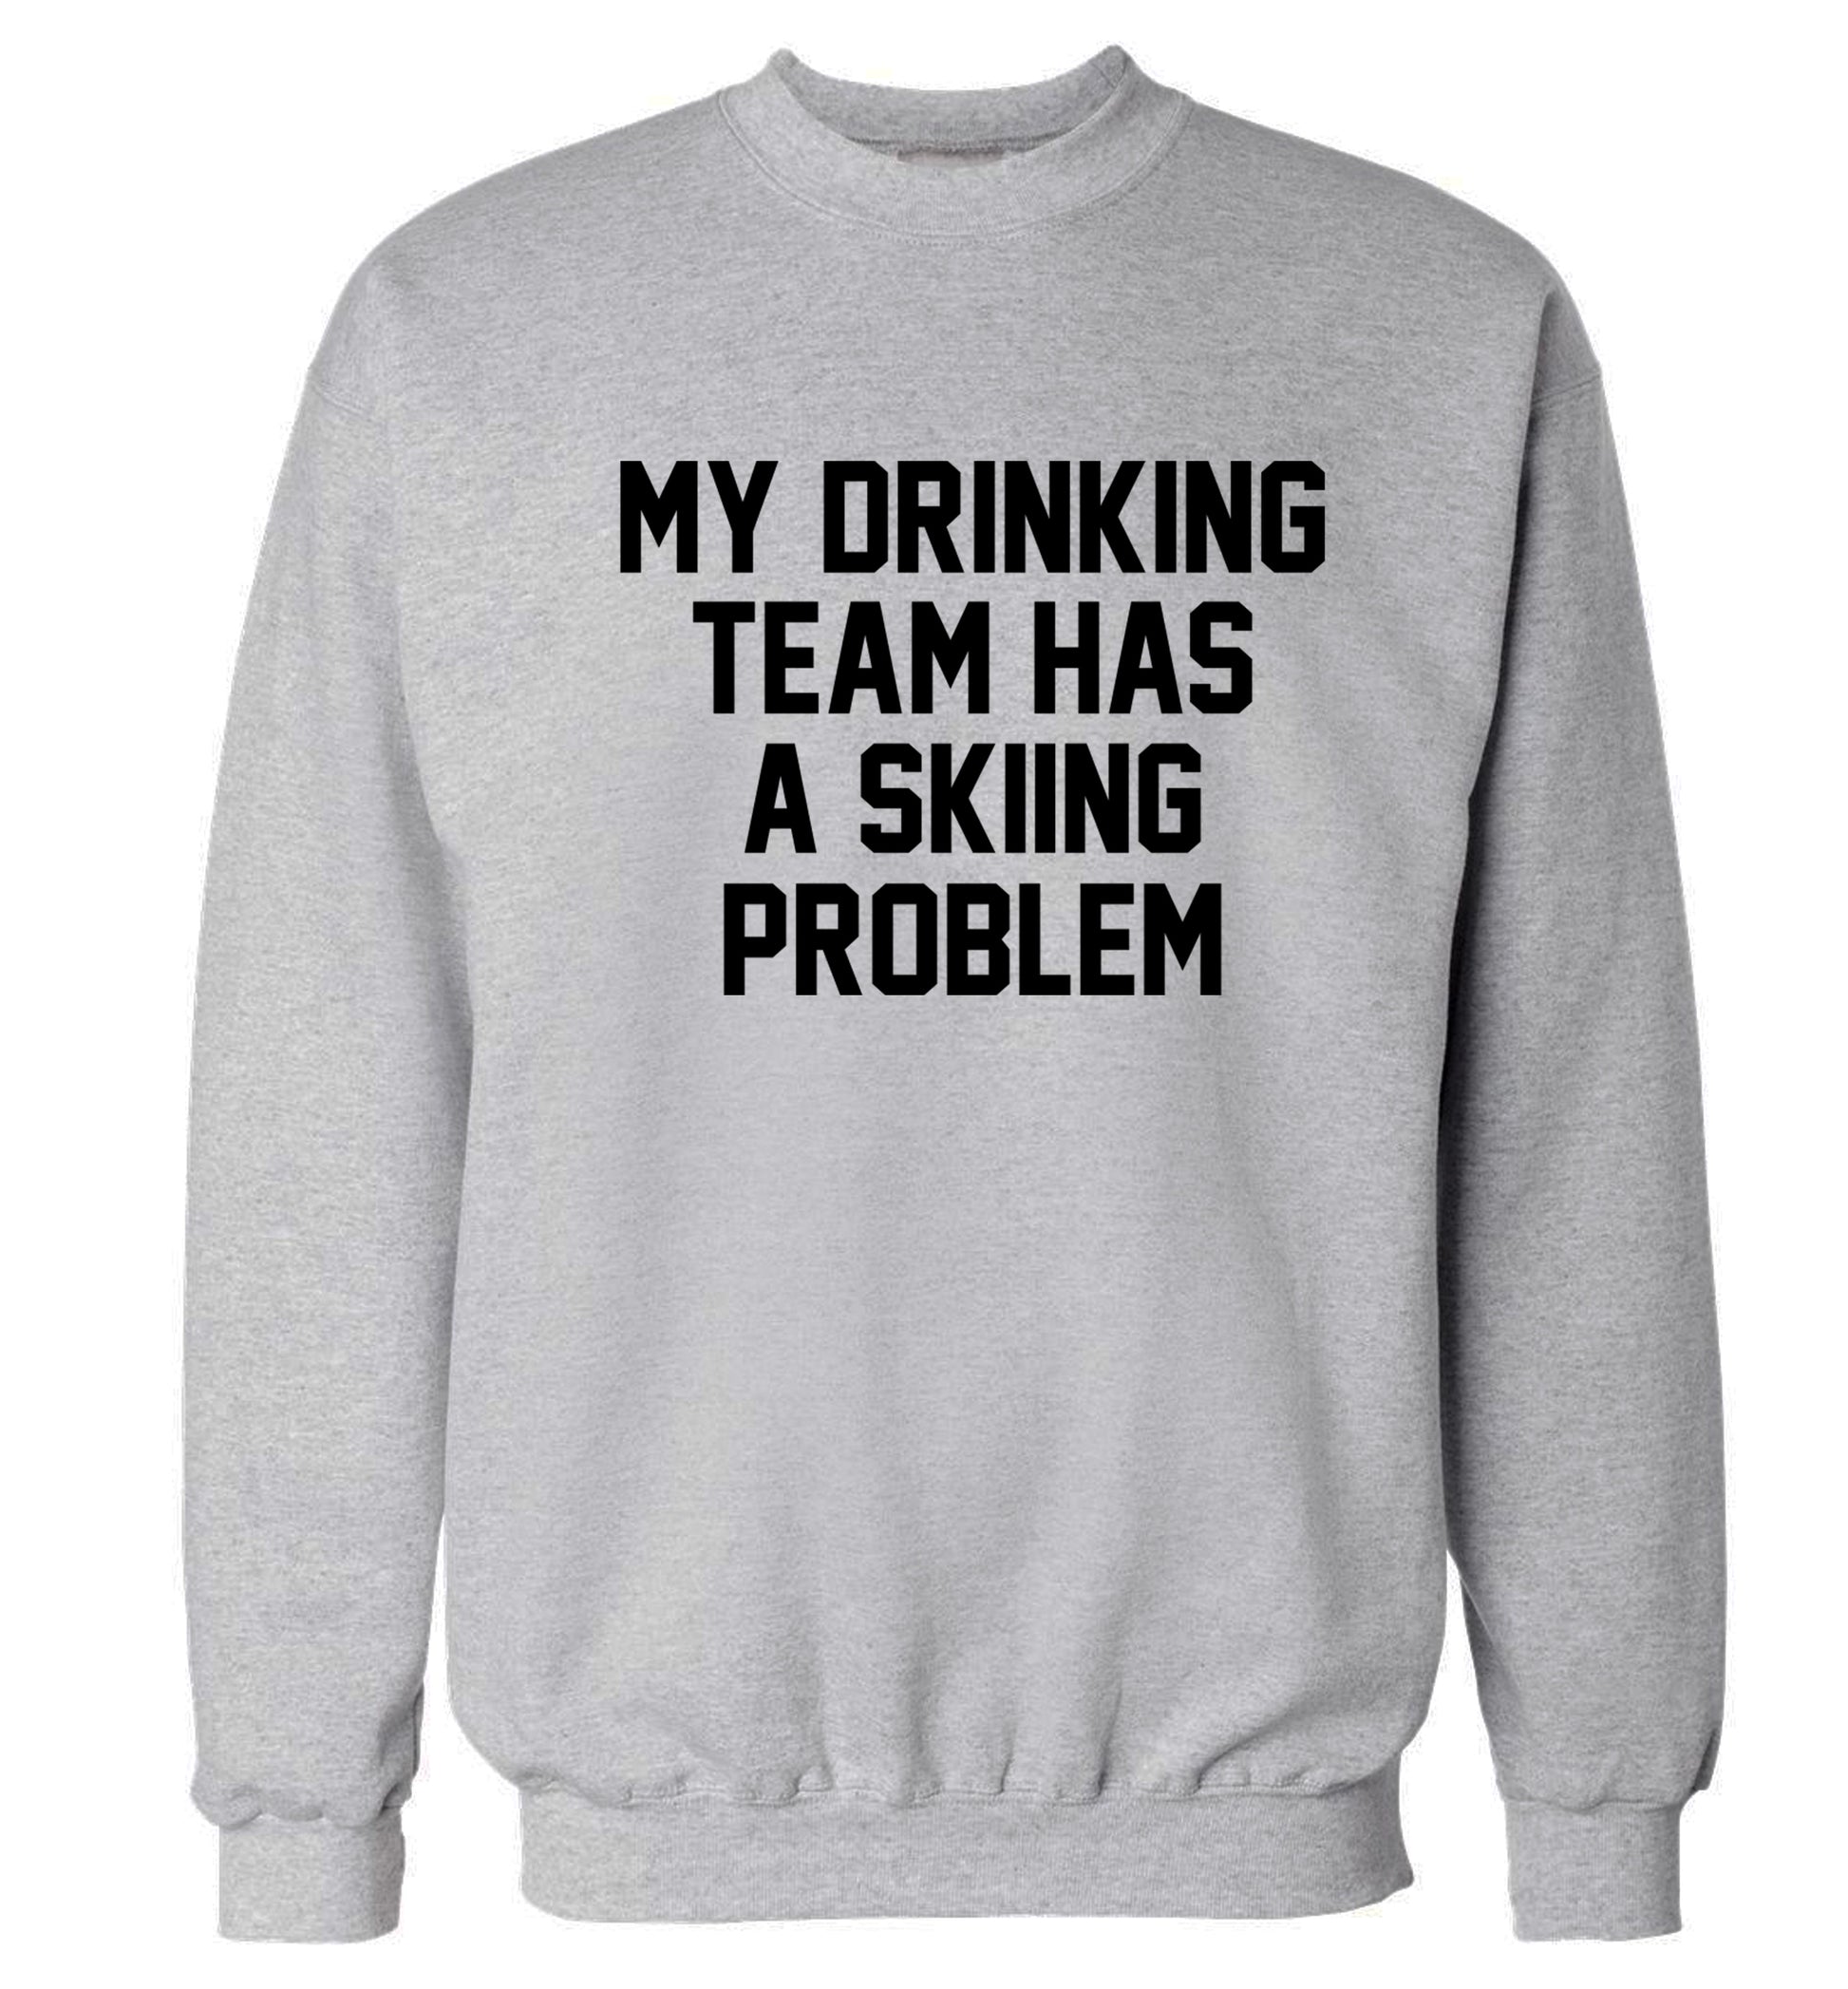 My drinking team has a skiing problem Adult's unisexgrey Sweater 2XL